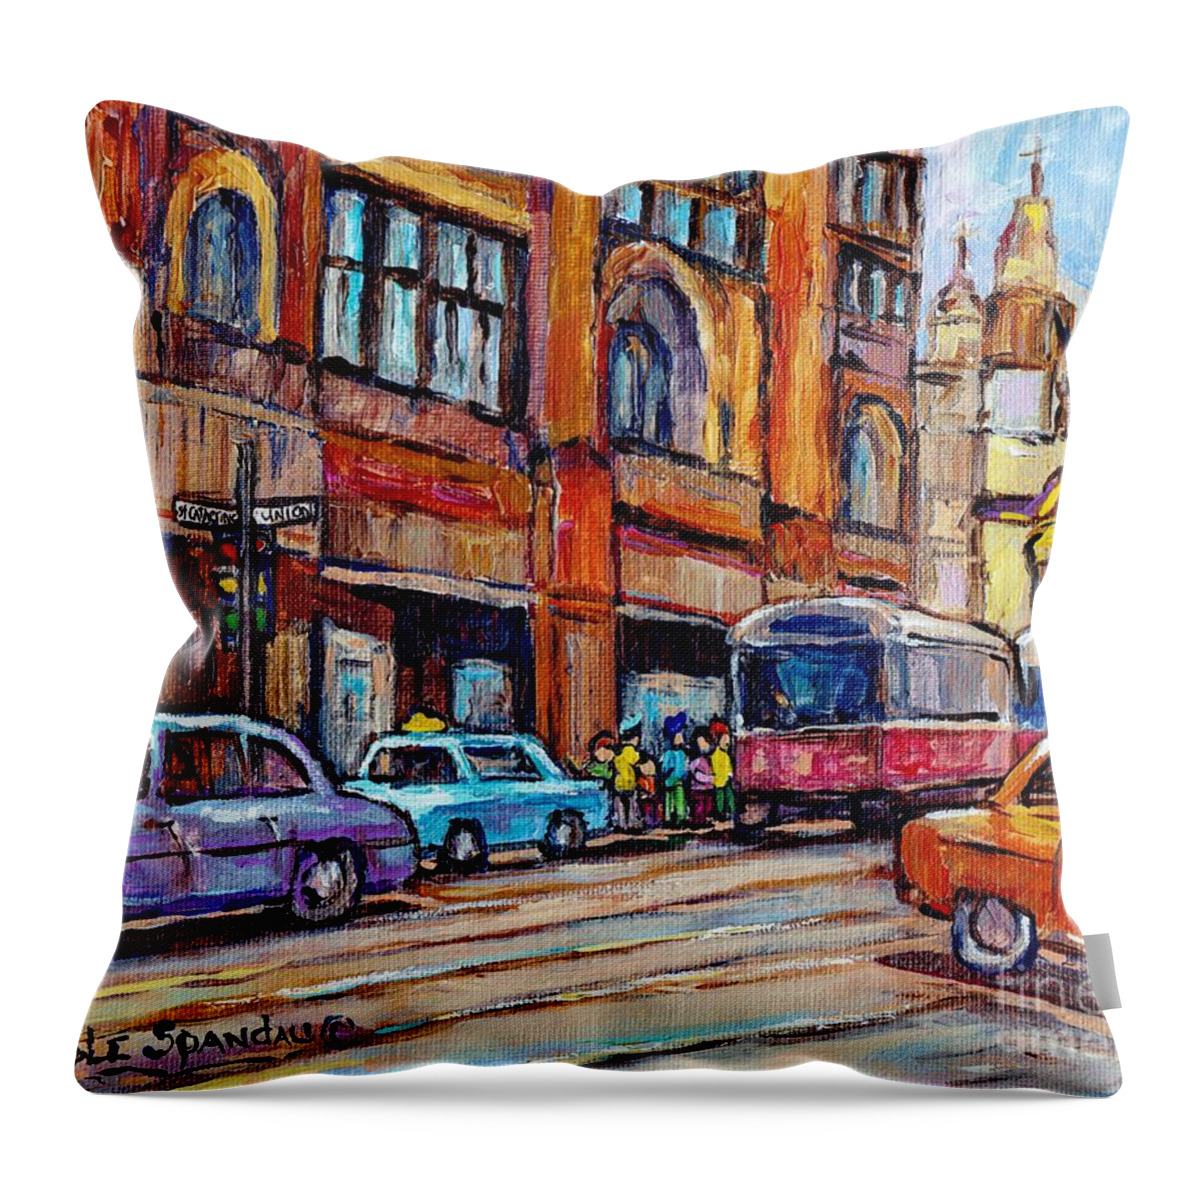 Montreal Throw Pillow featuring the painting Tram Streetcars At The Bay Downtown Montreal Vintage Paintings For Sale C Spandau City Scene Artist by Carole Spandau